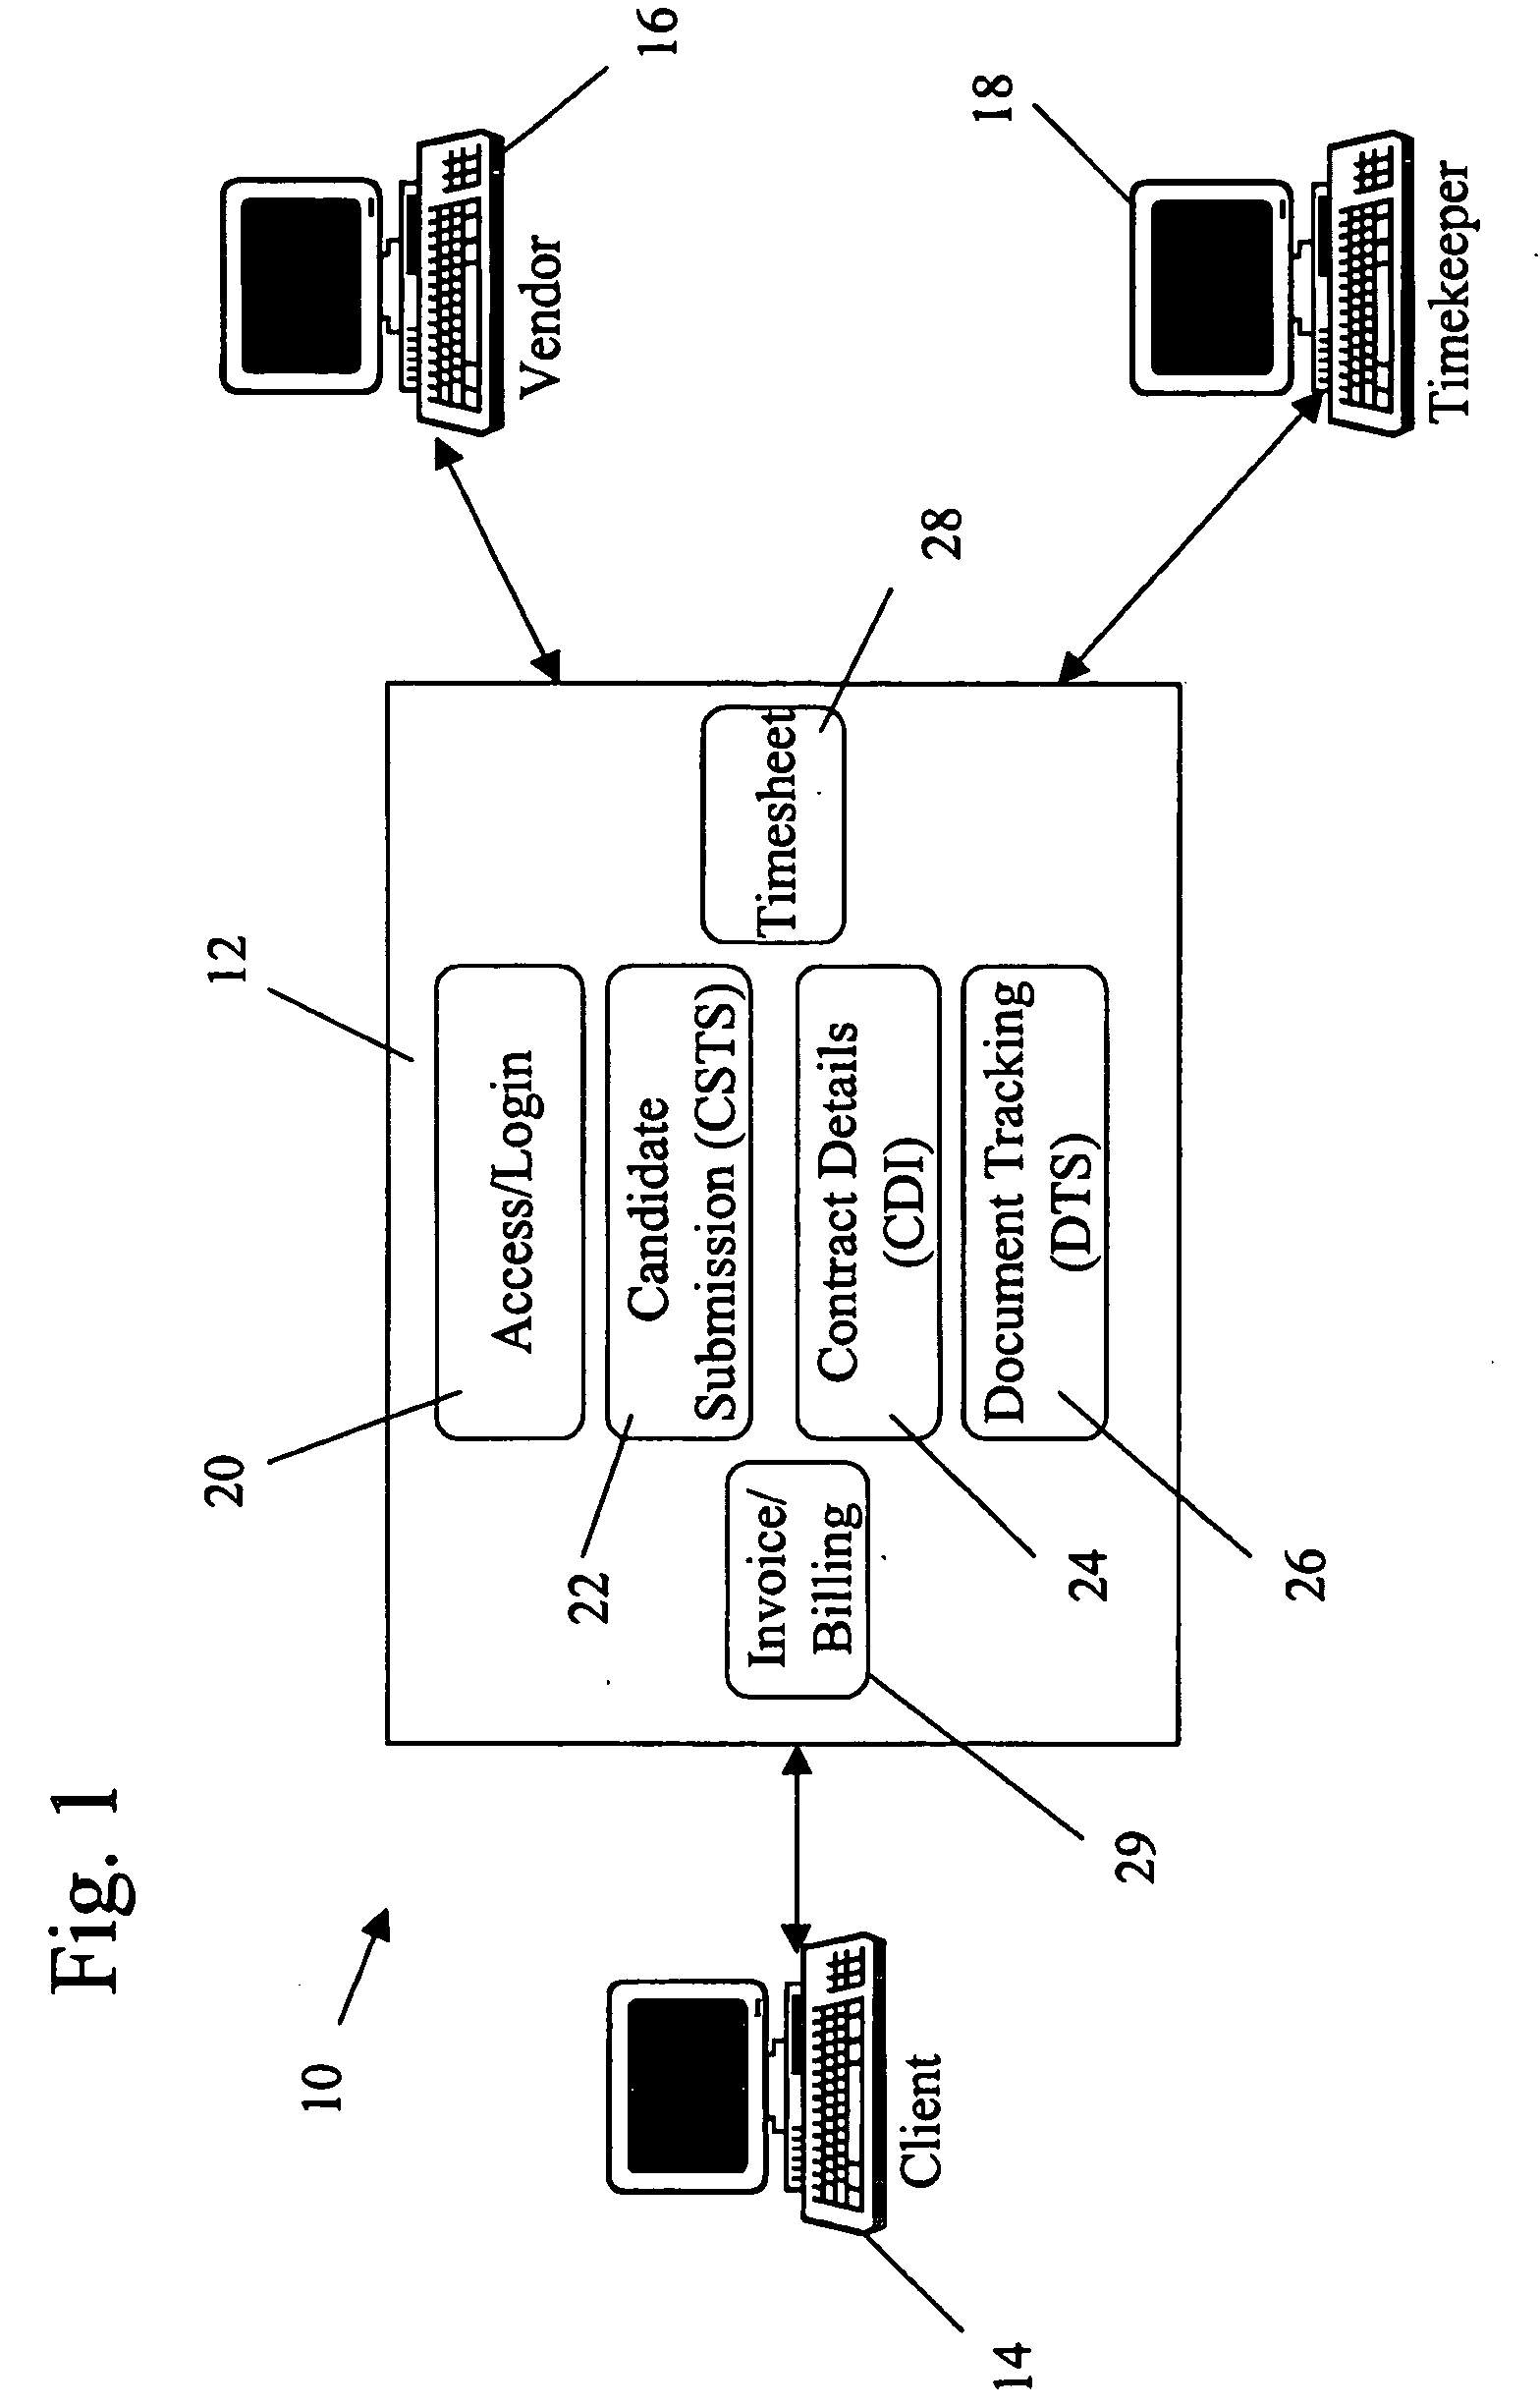 System and method for improved time reporting and billing